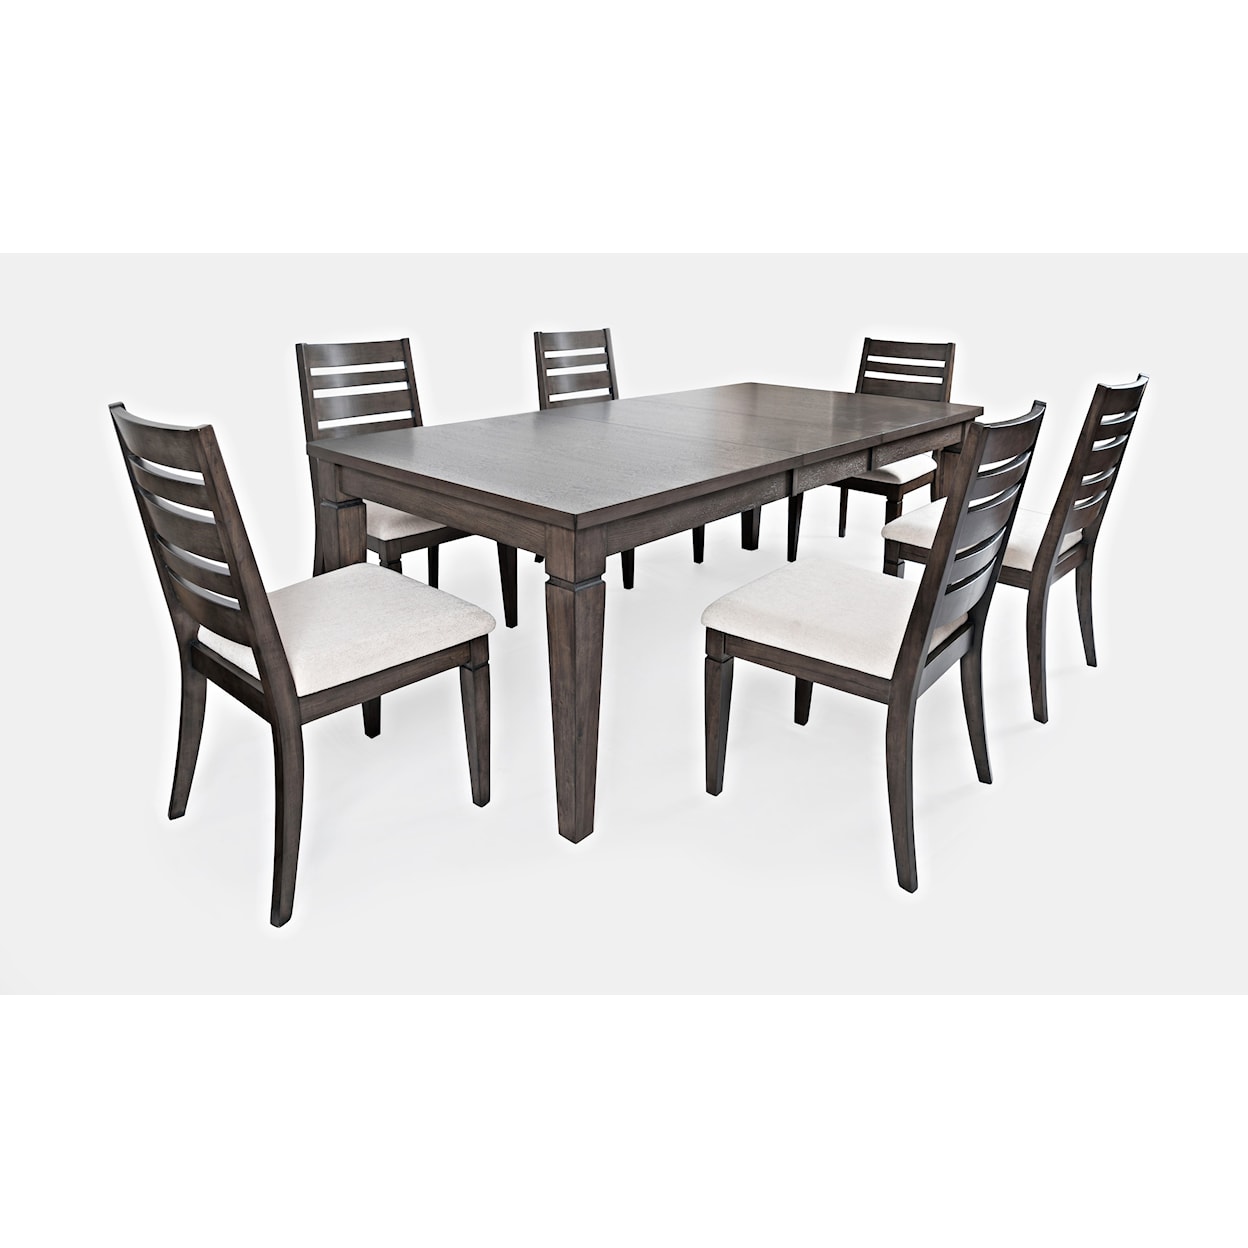 VFM Signature Lincoln Square 7-Piece Table and Chair Set